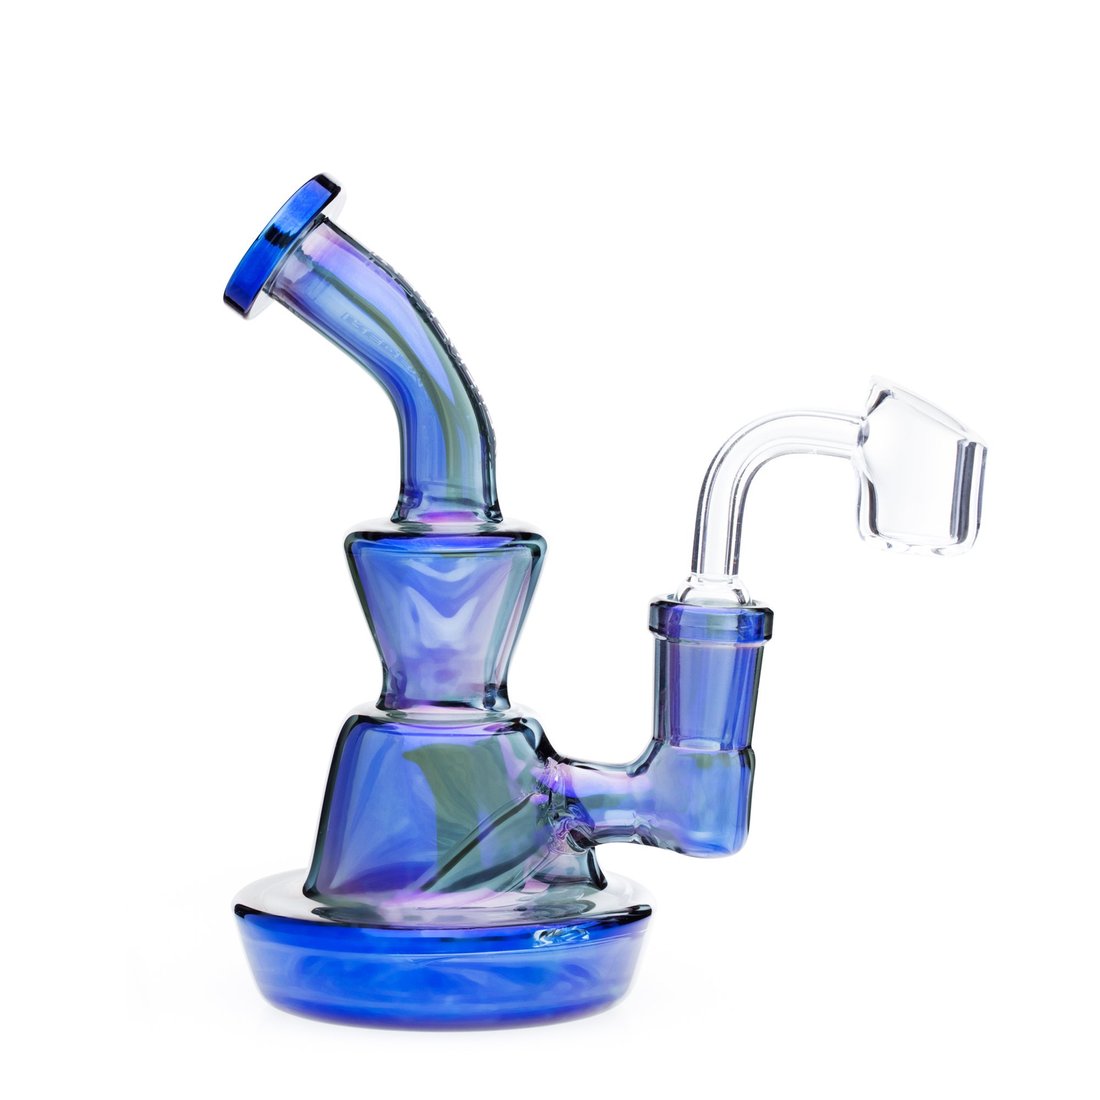 Heady glass Oil rig Bong Water Pipe Slime Green With Shower Head Percolator